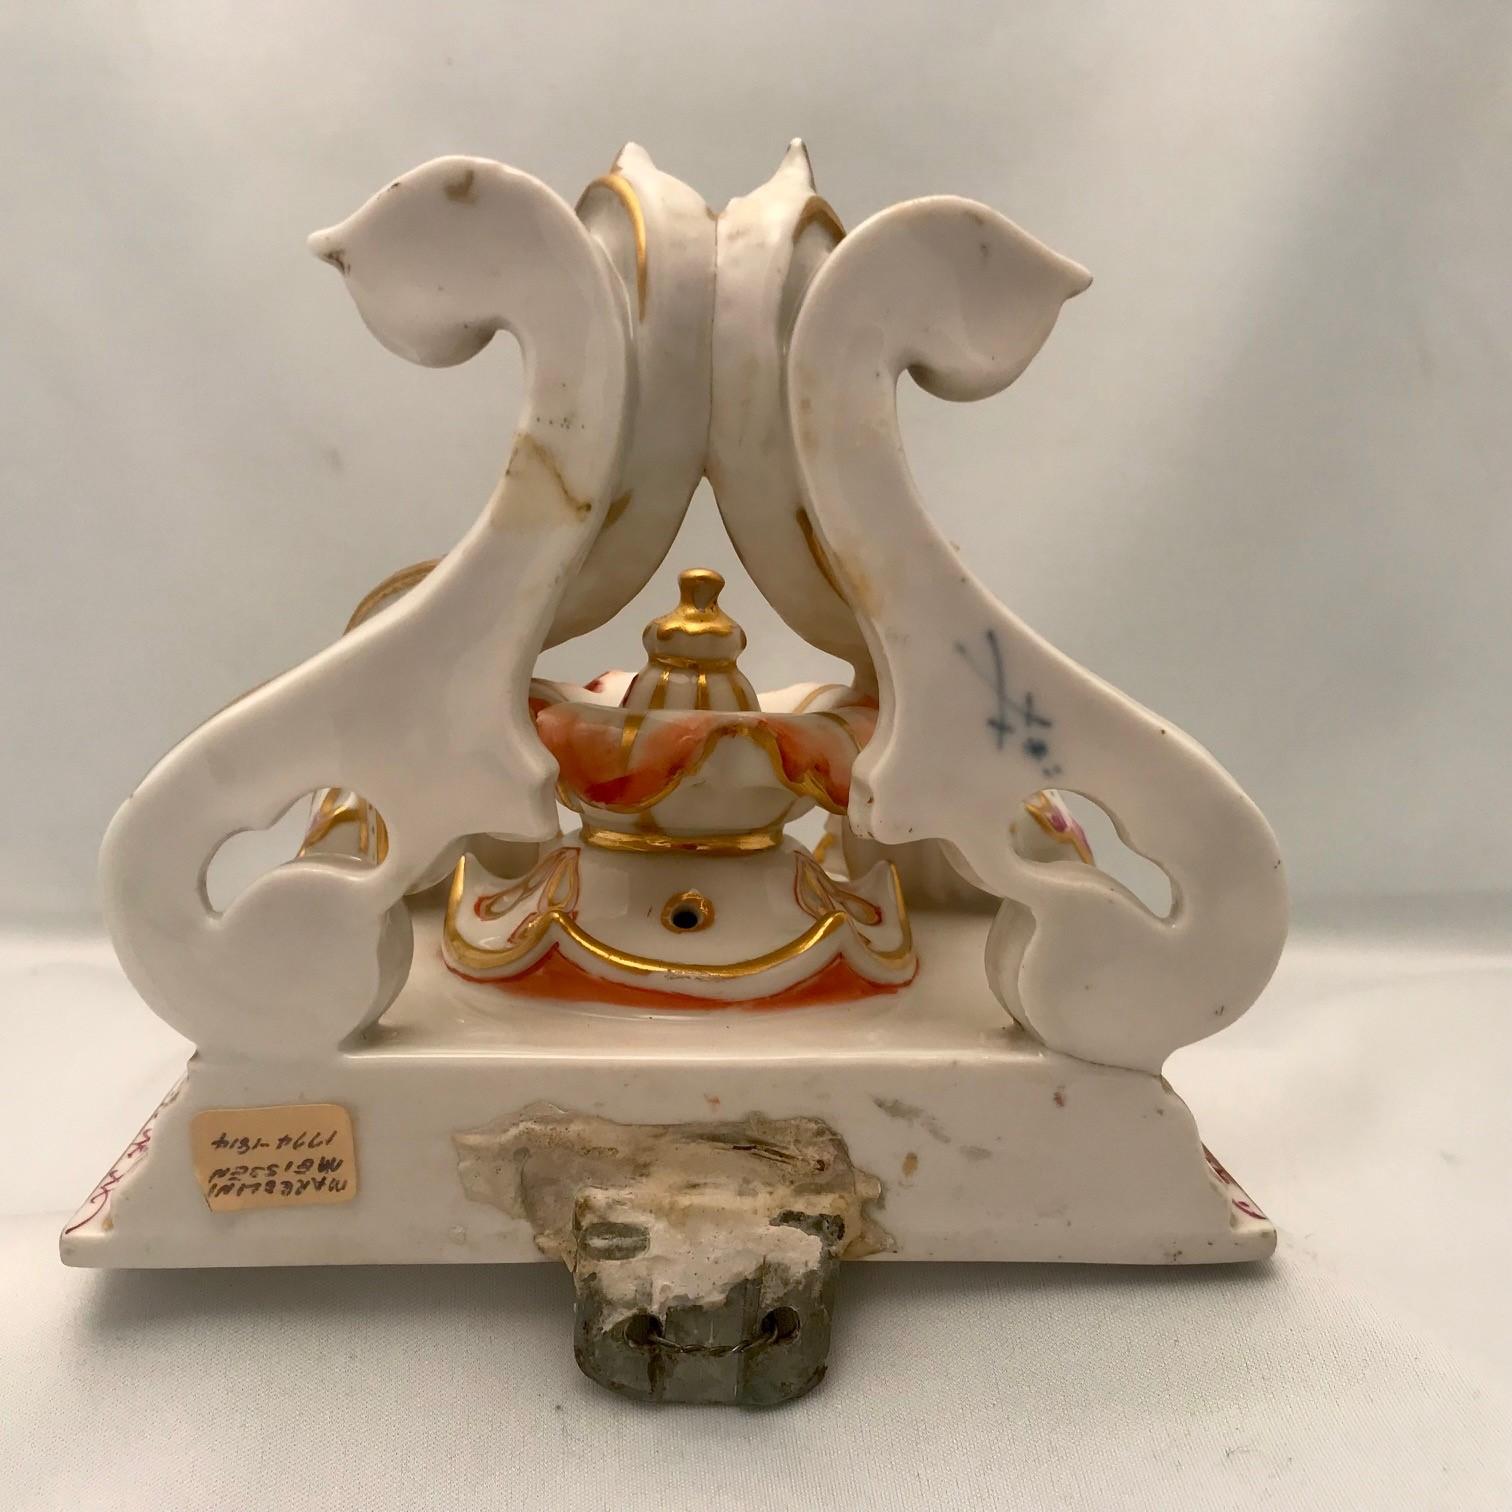 Pair of Late I9th Century German Porcelain Wall Brackets For Sale 4